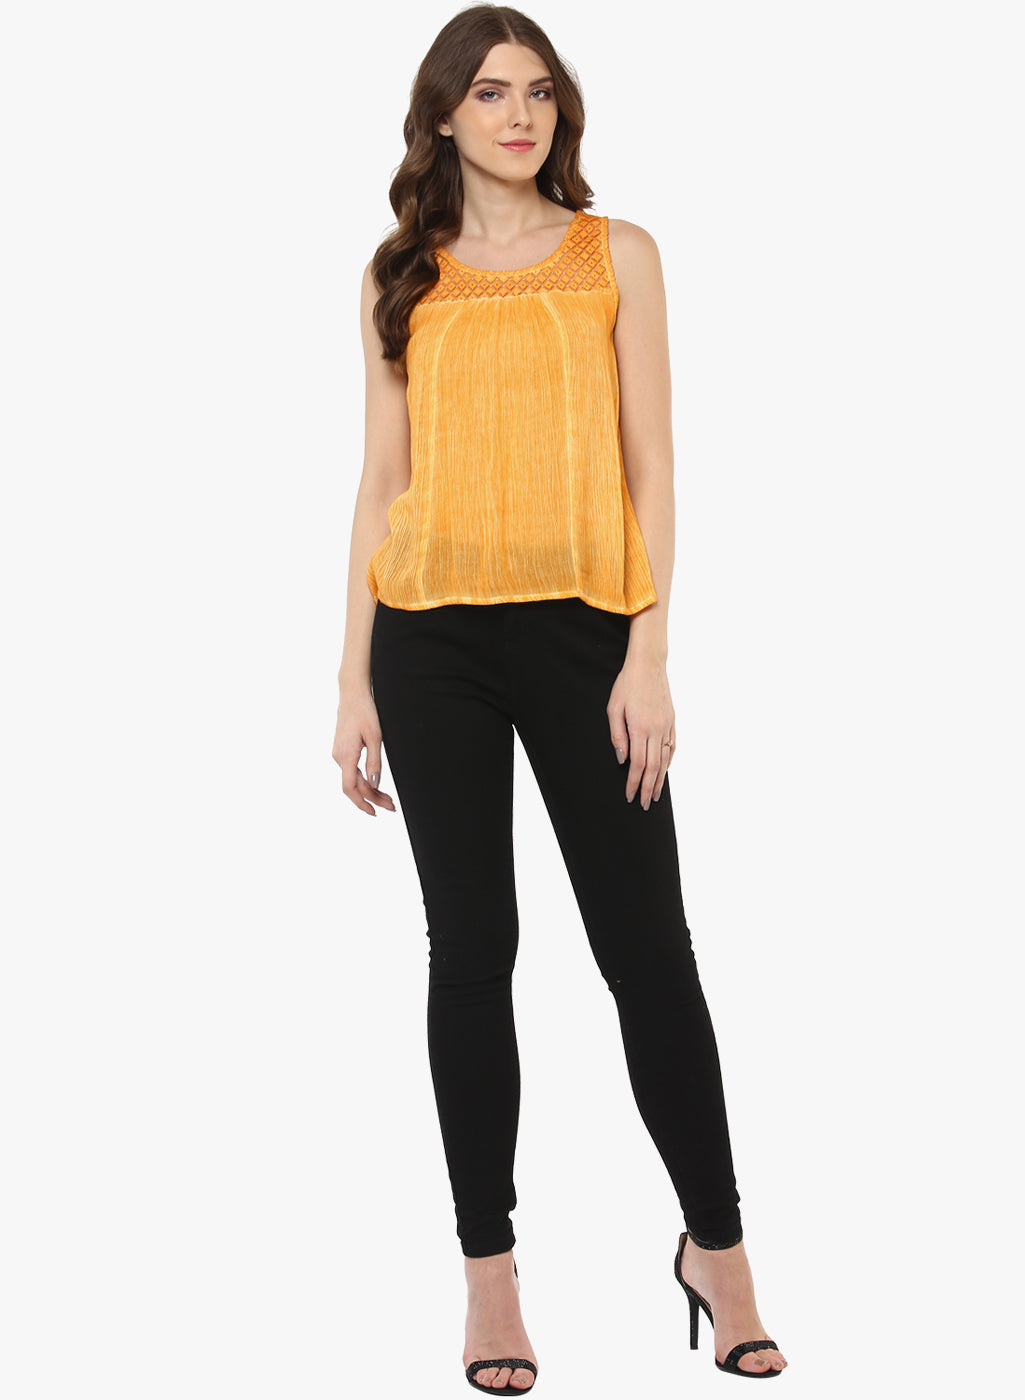 PORSORTE Women's Yellow Rayon crepe Top with lace details - www.porsorte.in